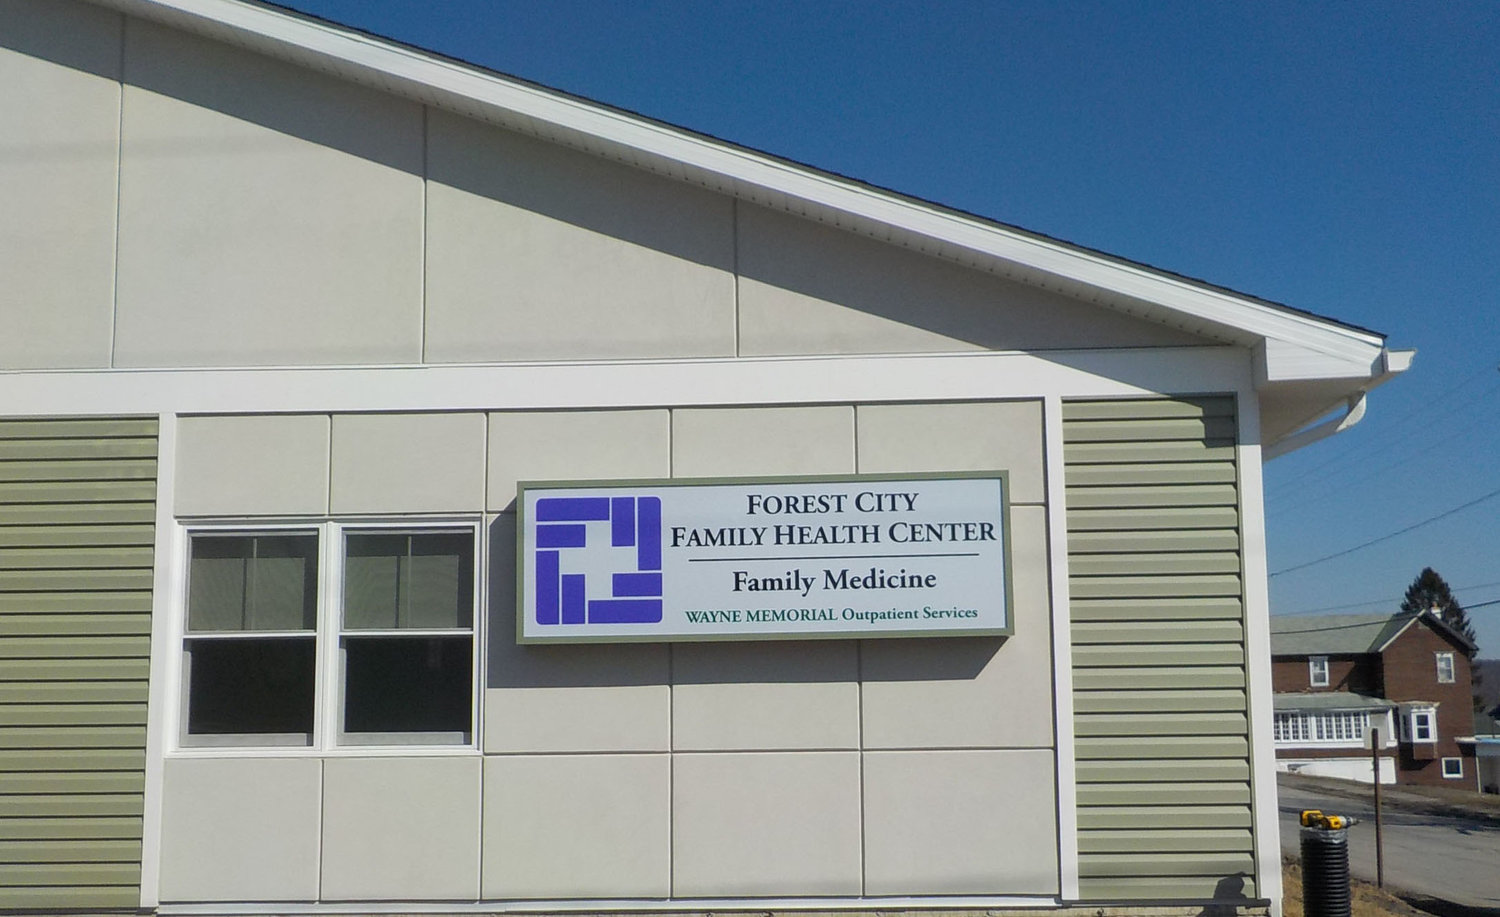 Wayne Memorial Outpatient Services is temporarily curtailing hours at its laboratory services site in Forest City from five days to three days a week to accommodate staff shortages at Wayne Memorial Hospital in Honesdale.